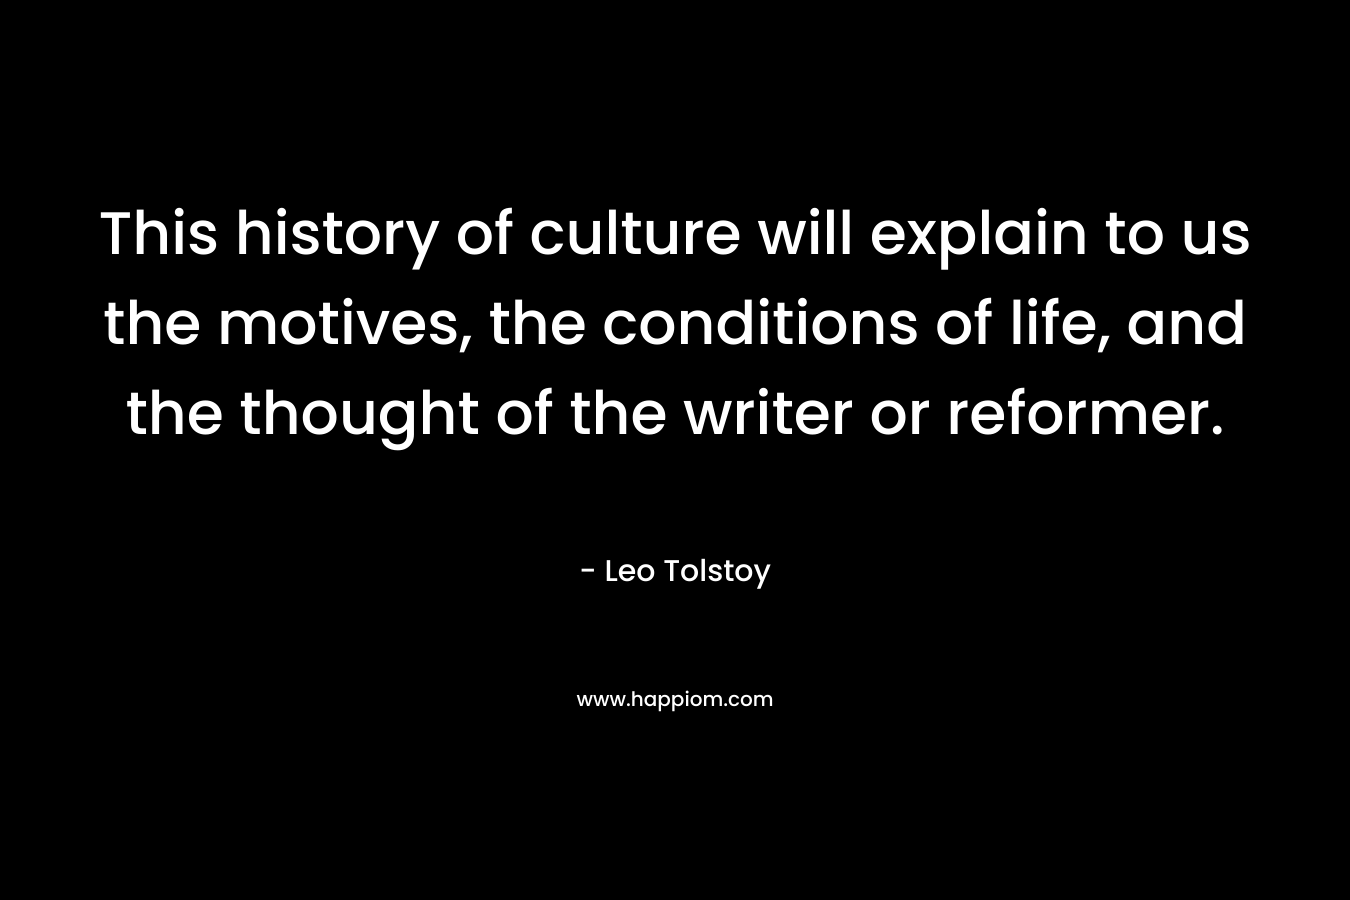 This history of culture will explain to us the motives, the conditions of life, and the thought of the writer or reformer. 